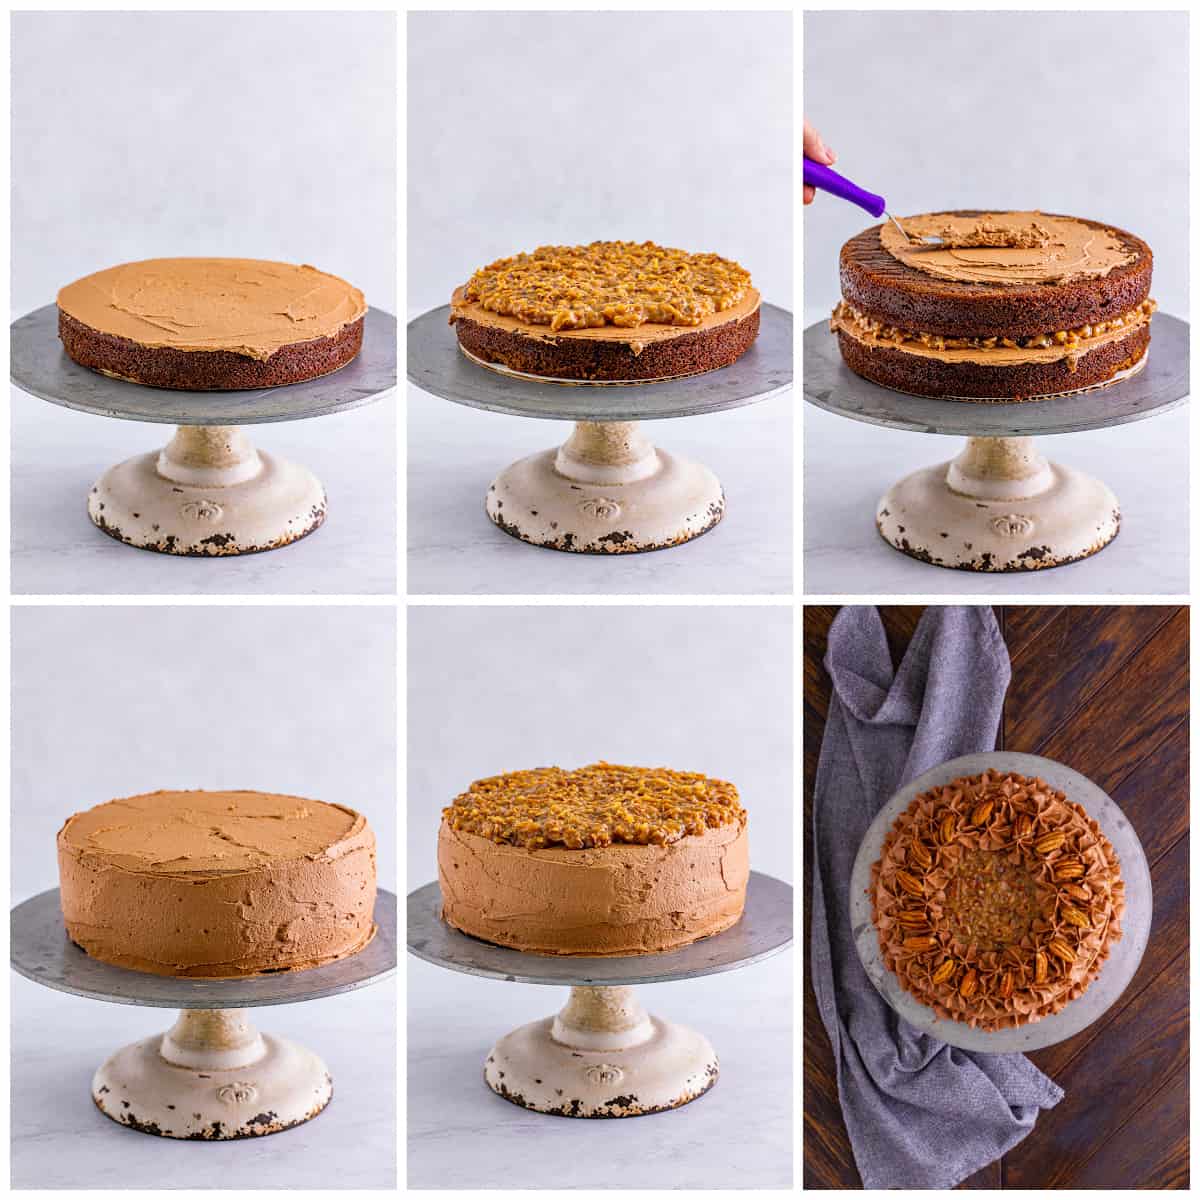 Step by step photos on how to assemble cake.